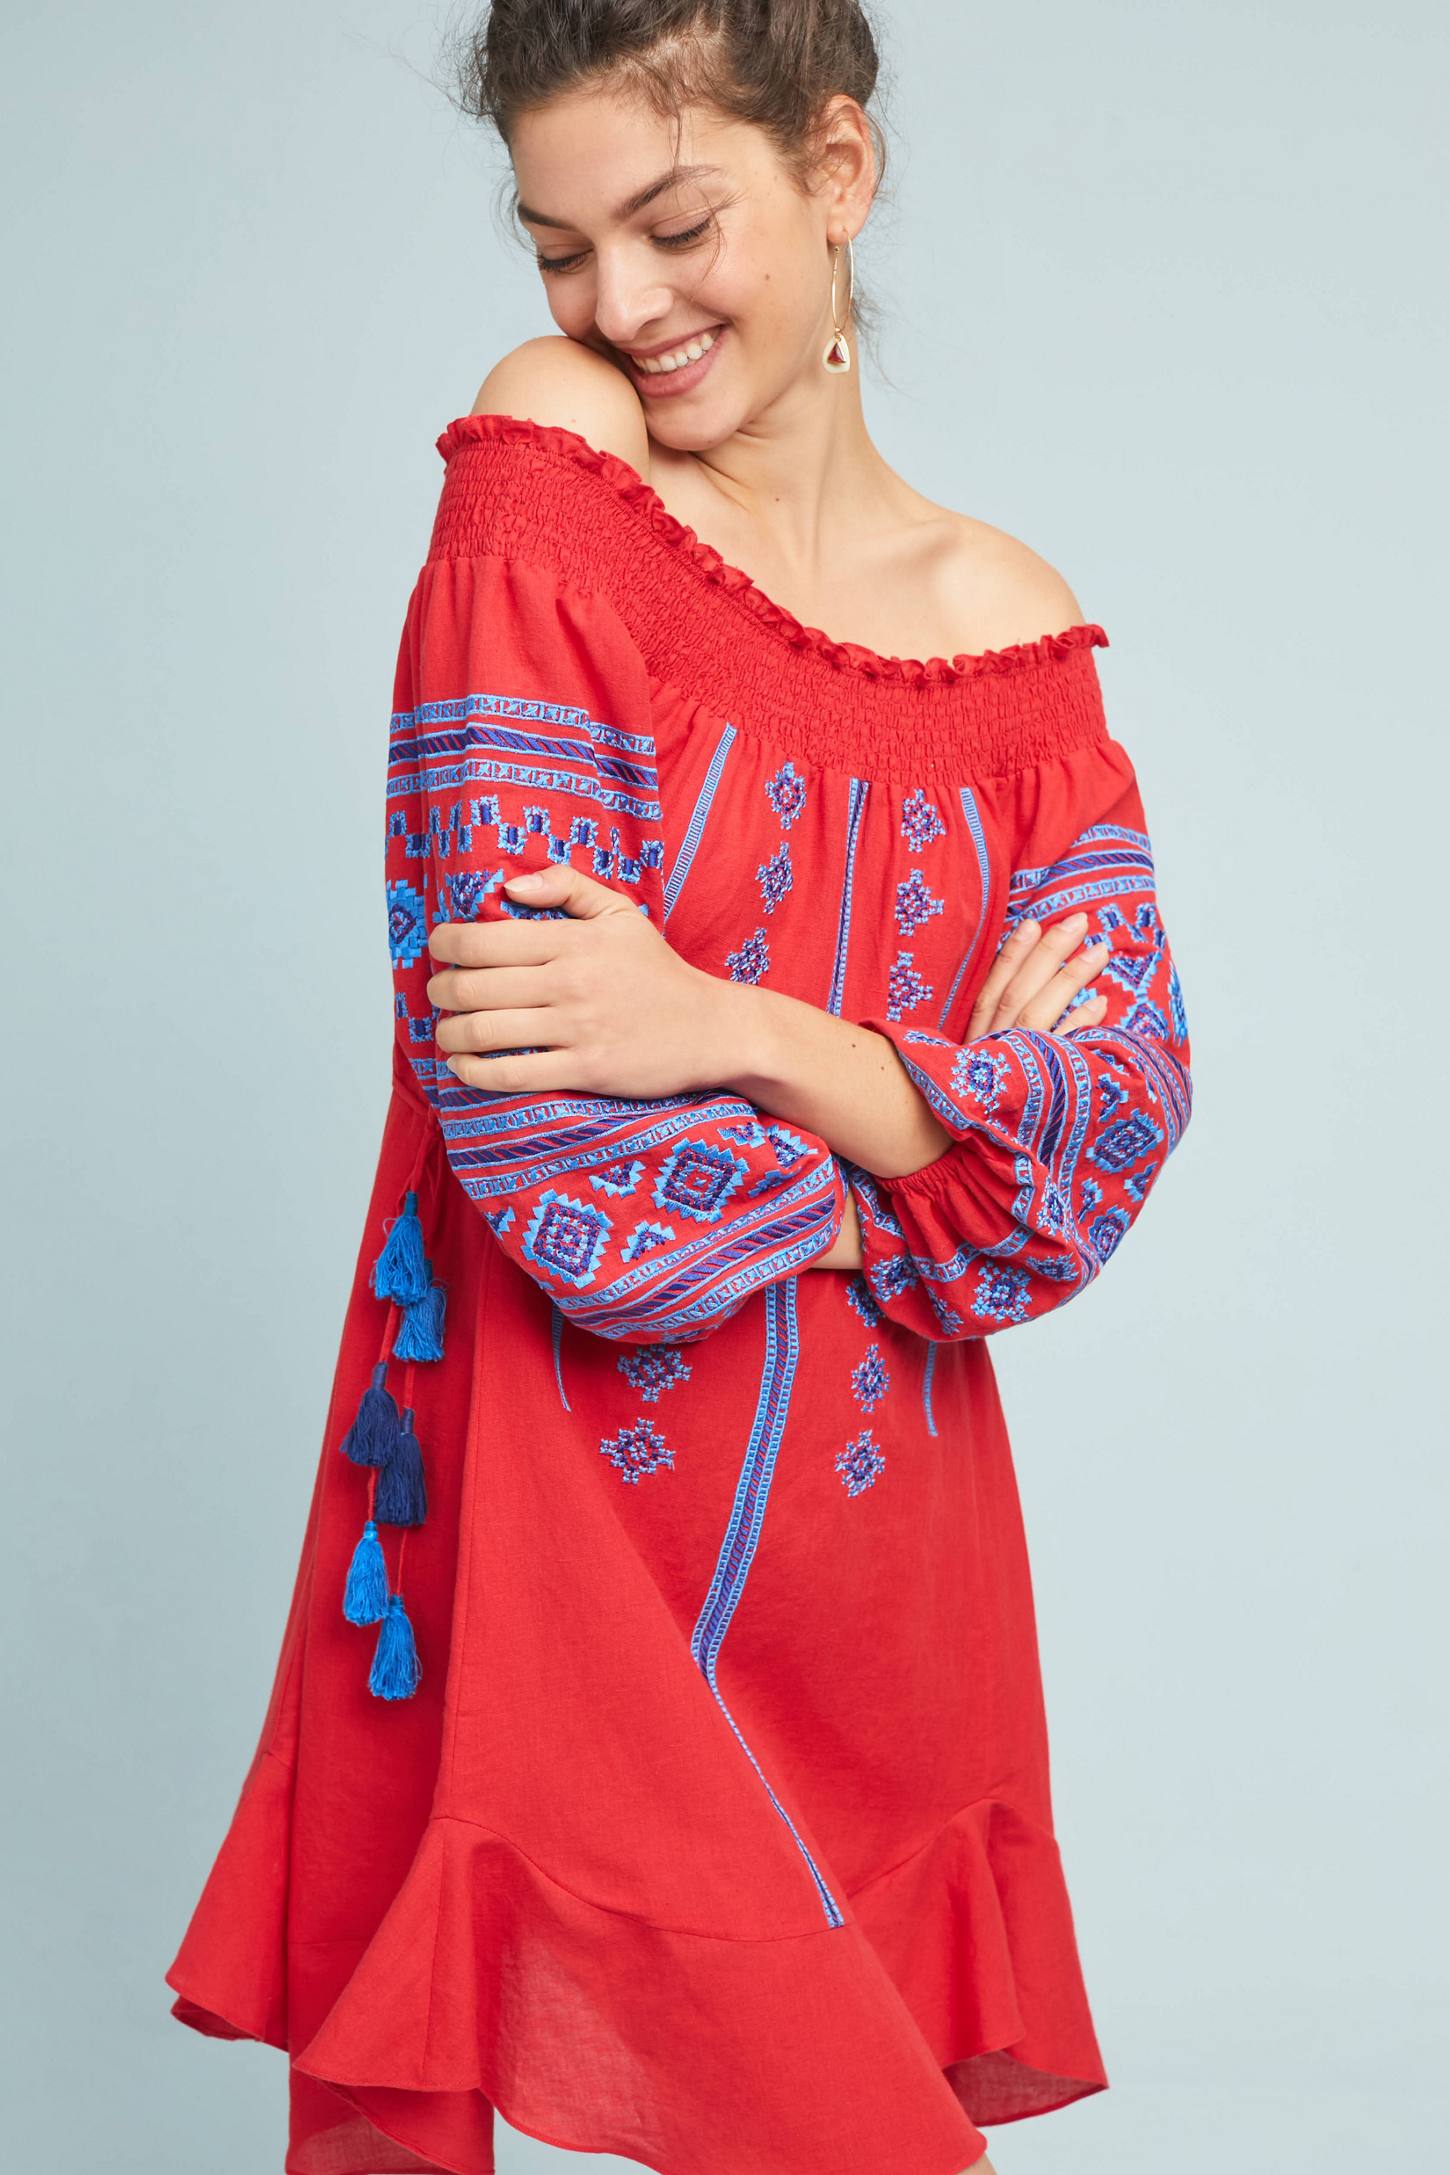 Red Off-the-Shoulder Peasant Dress Bohemian Blue Embroidered